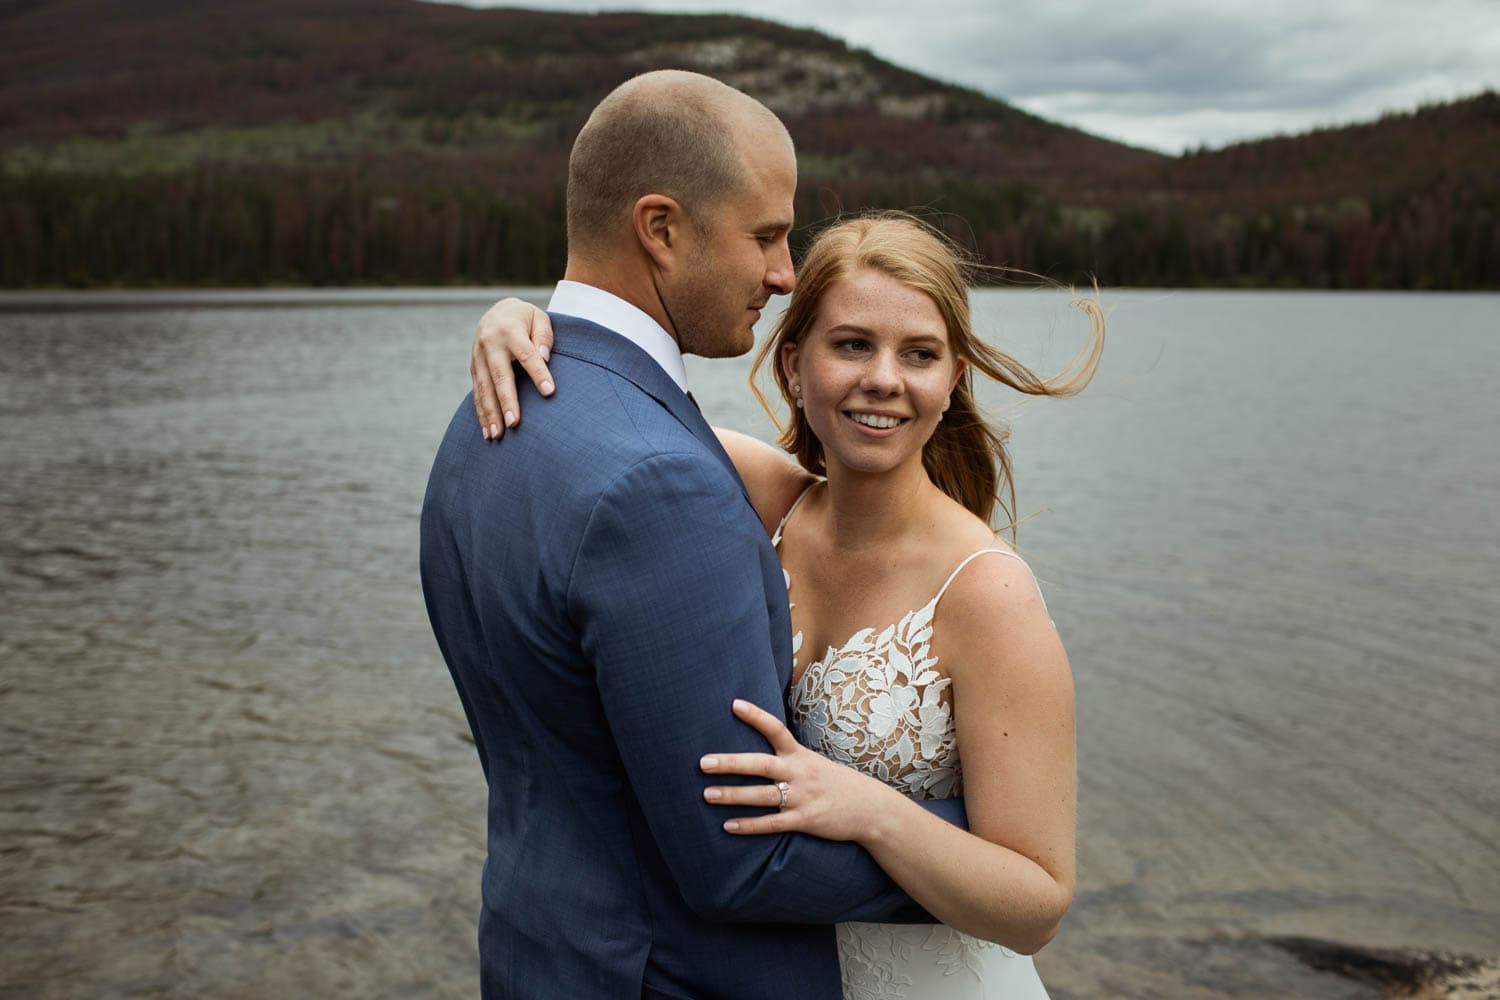 bride and groom mountain portrait